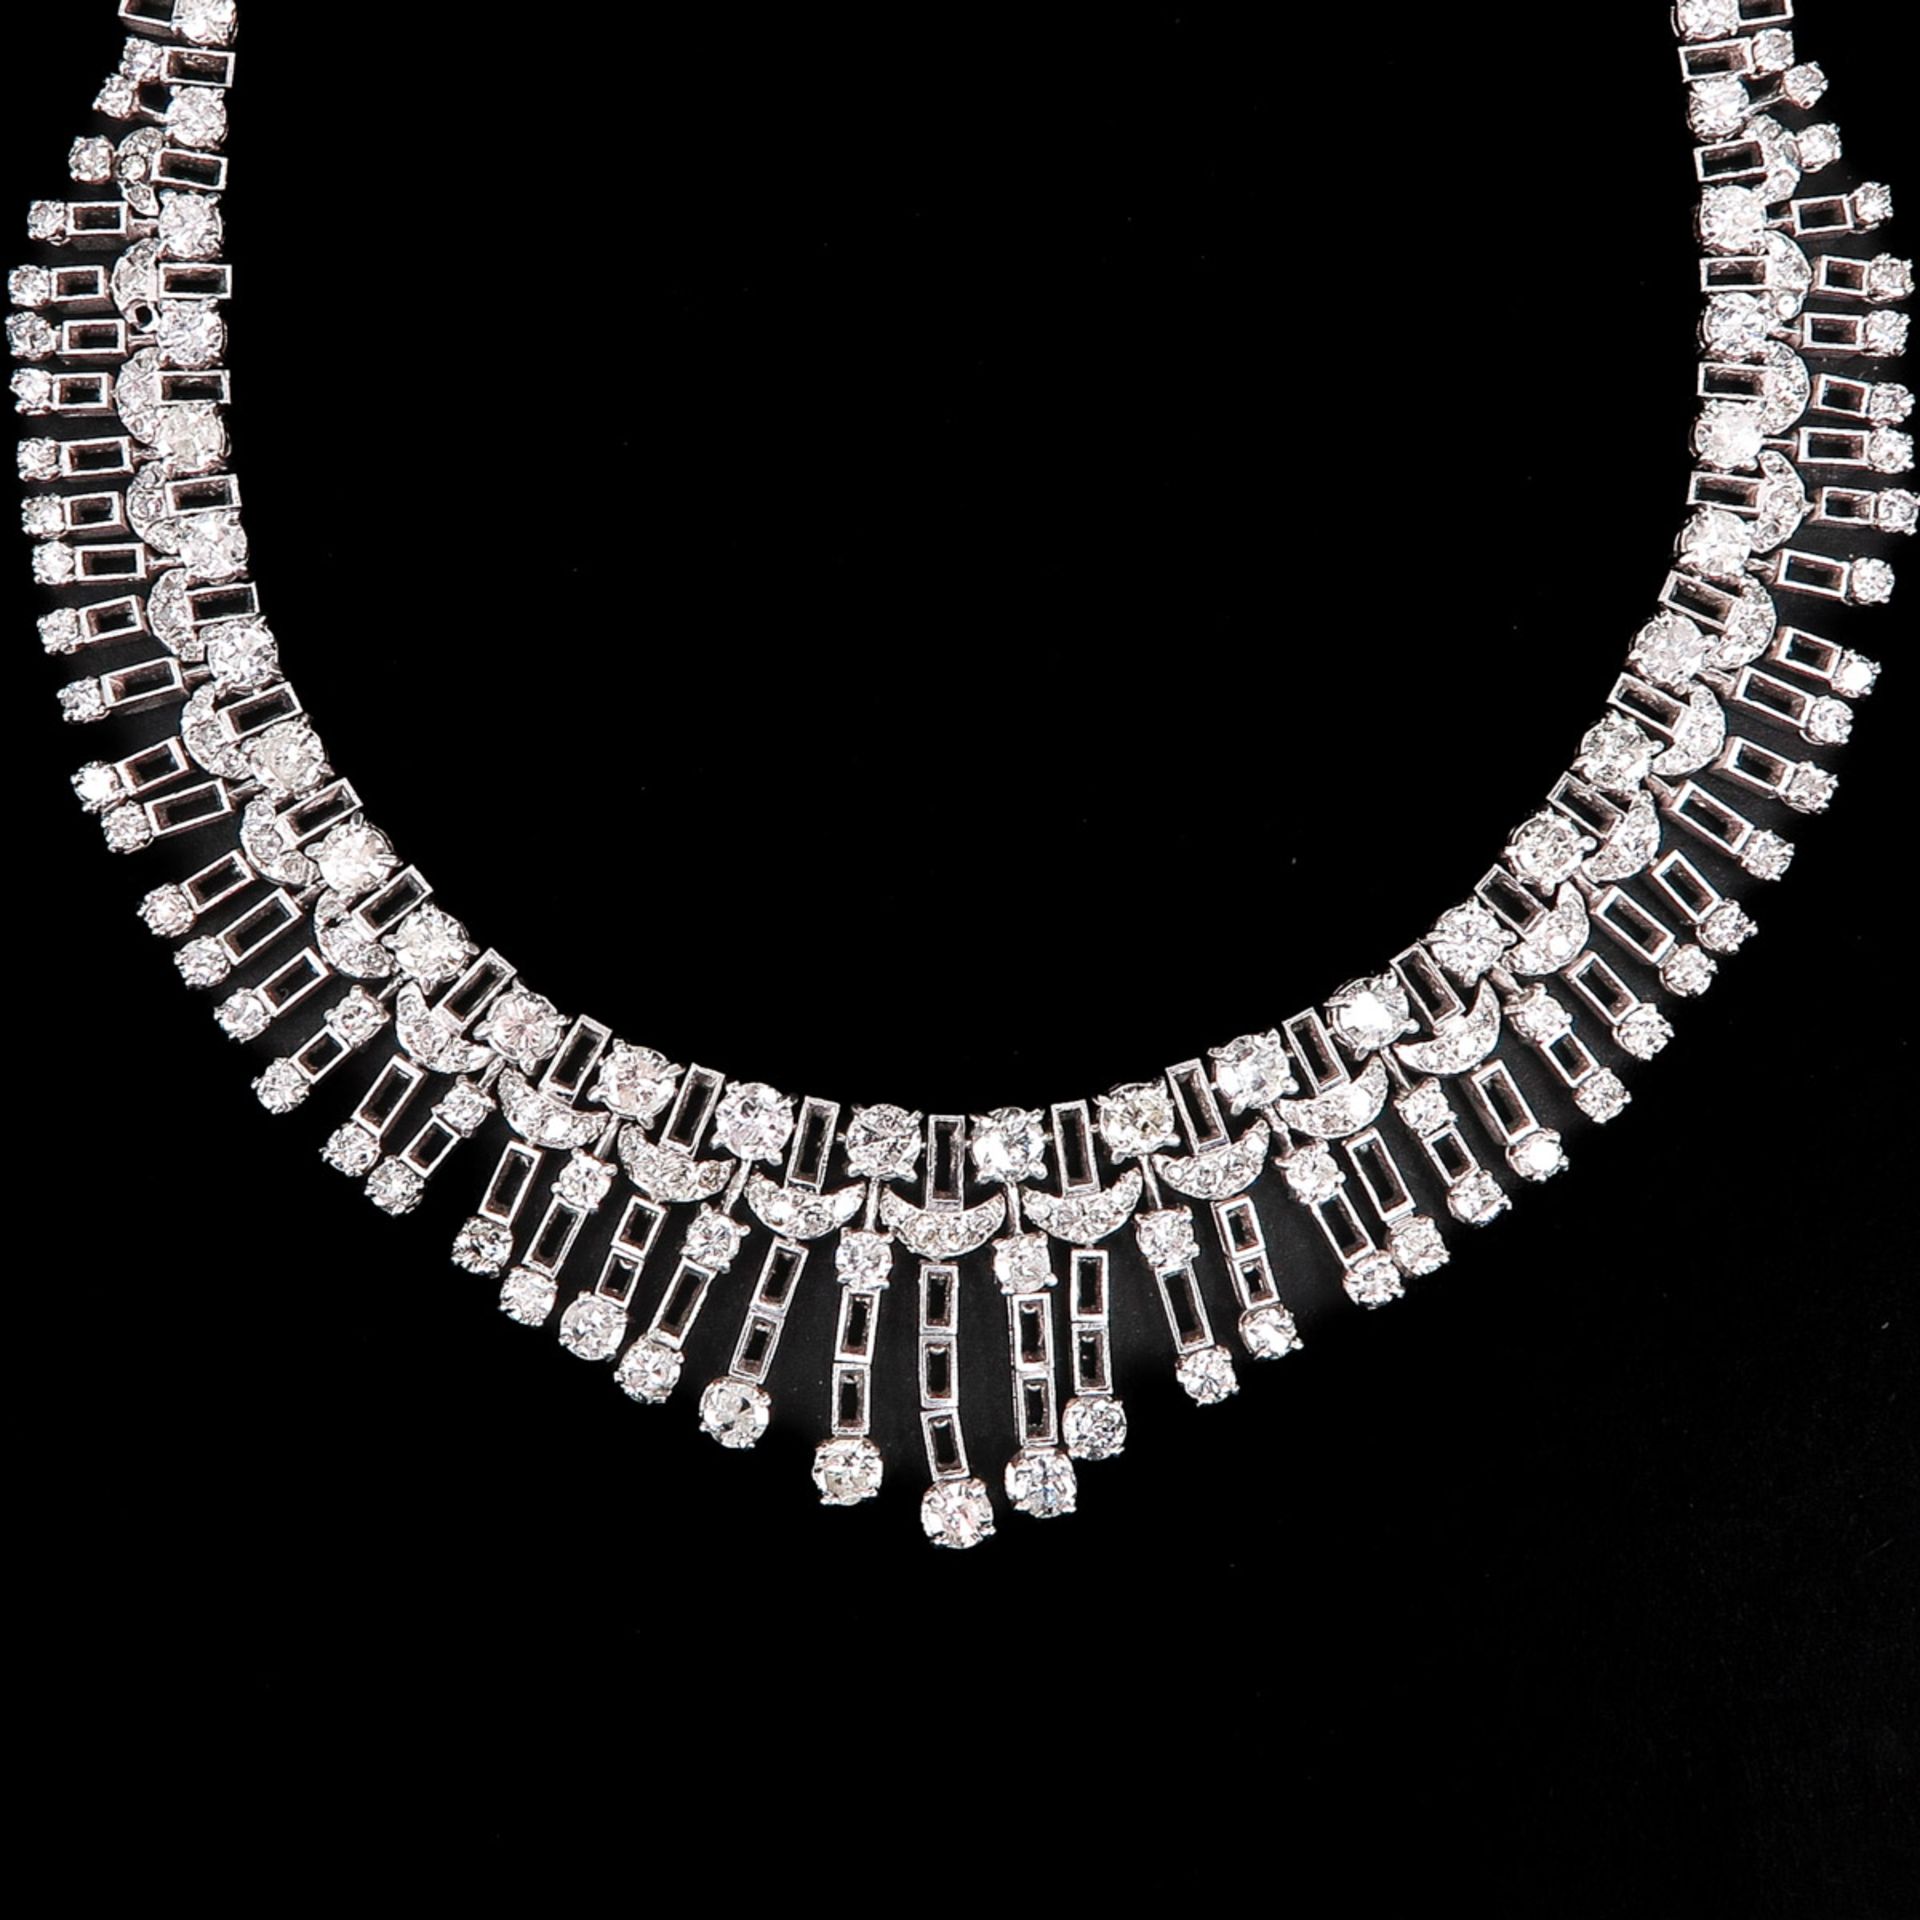 A Platinum and Diamond Necklace - Image 2 of 3